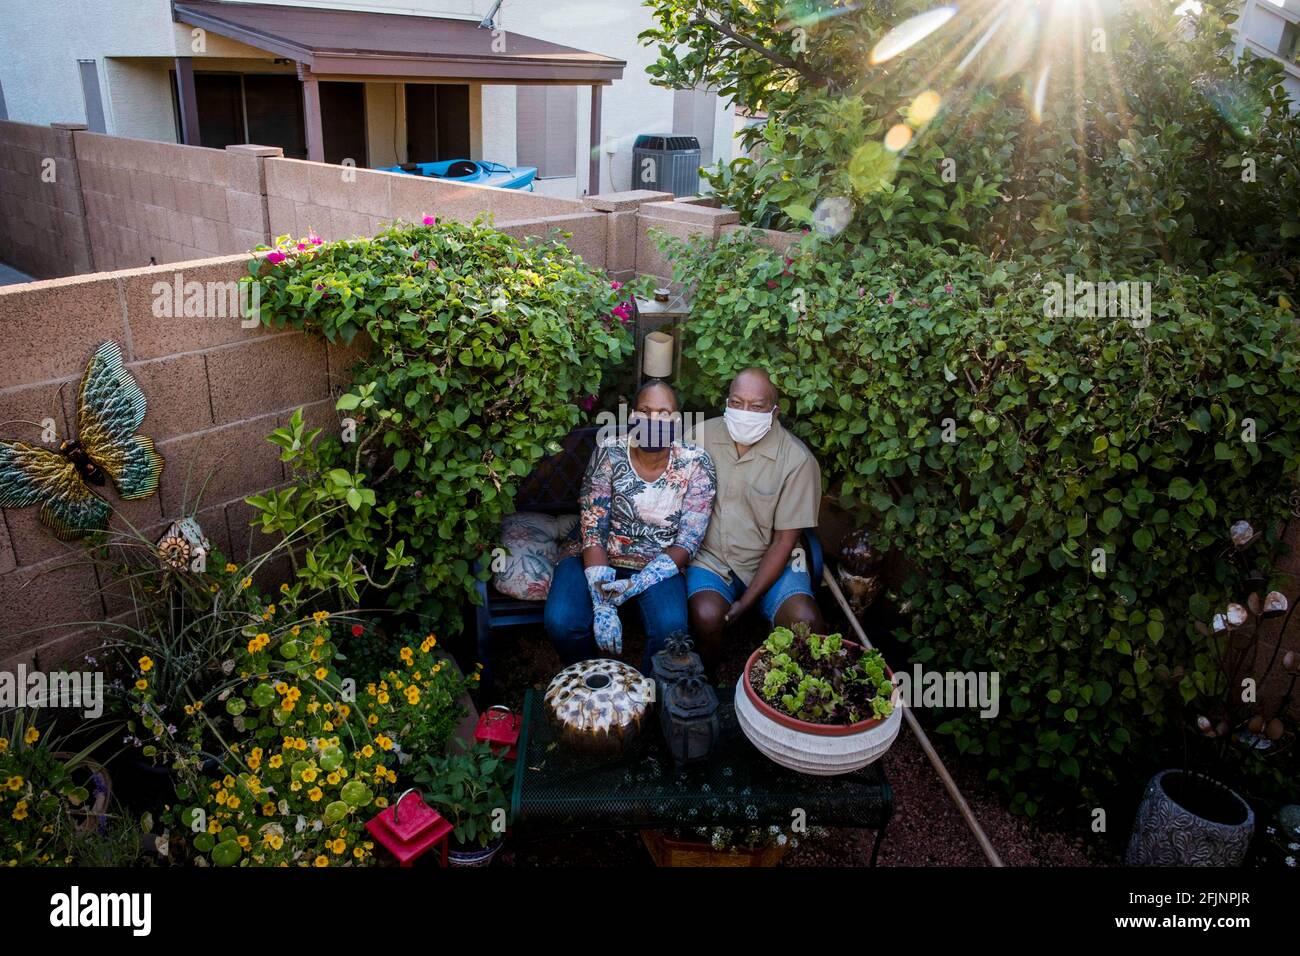 Arizona, USA. 18th May, 2020. When the lockdown hit, Jewel and James Shelton simply got busier. They got busy taking their backyard oasis and sanctuary to a much higher level. In the middle of Gilbert Arizona, they created a lush green tableau where they could escape the walls of their home that contained them as they isolated from the world to stay healthy during the COVID-19 Pandemic. ''Having a beautiful garden sanctuary in my backyard helps with my sanity, duringÂ these stressful times.Â The simple act of seeing beautiful plants is calming and relaxing.Â Maintaining this sanctuary is grea Stock Photo